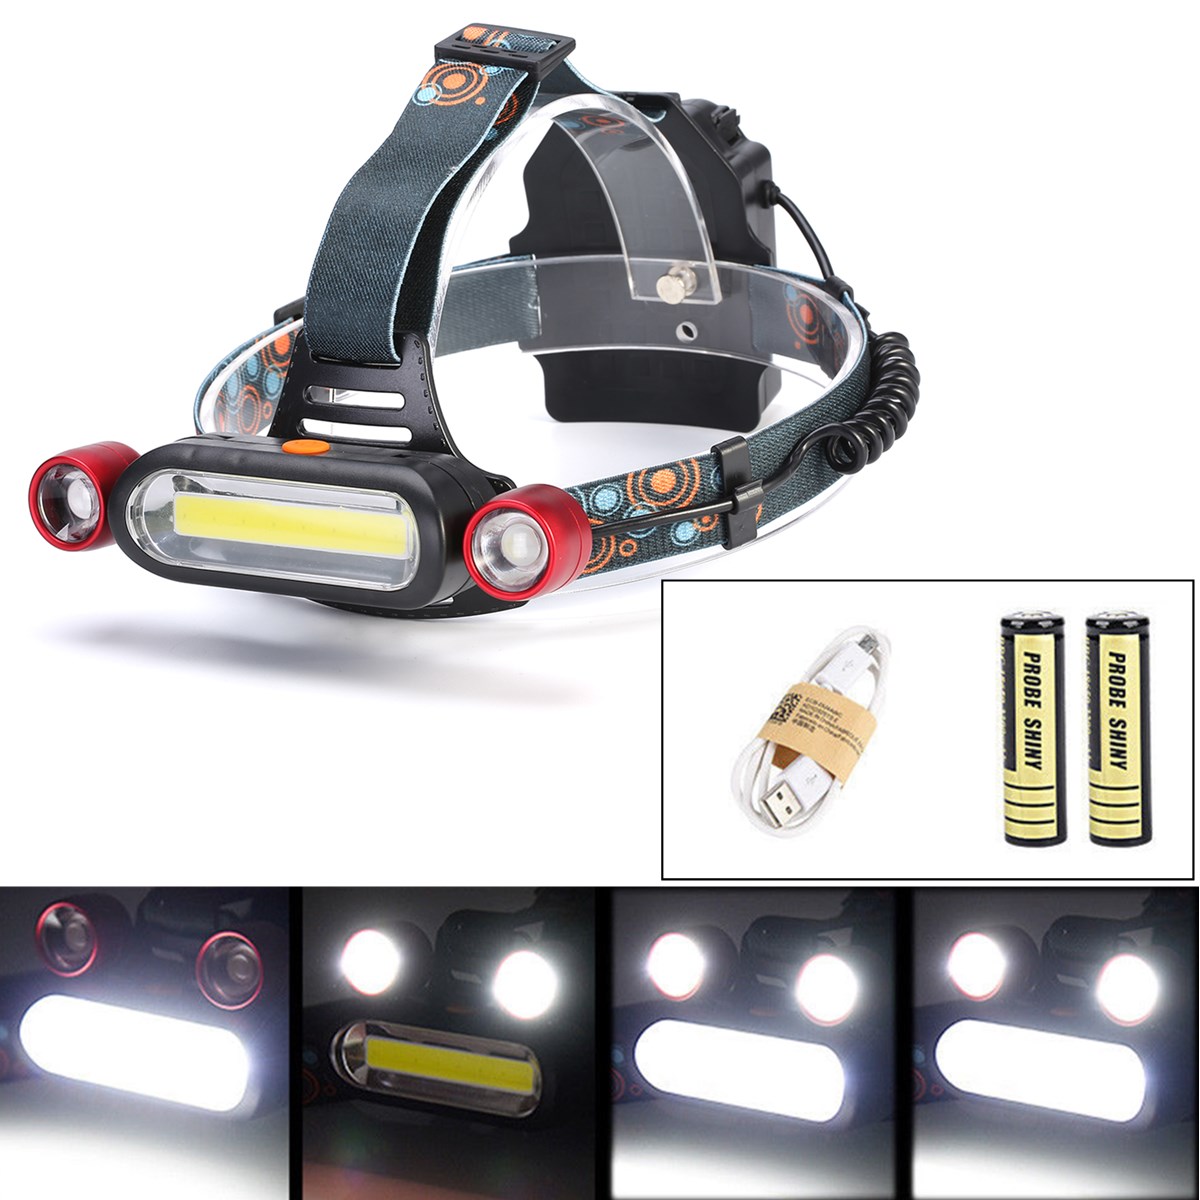 Zoomable 15000Lm XM-L2 LED 4Modes Headlamp Hunting Camping Torch Headlight 18650